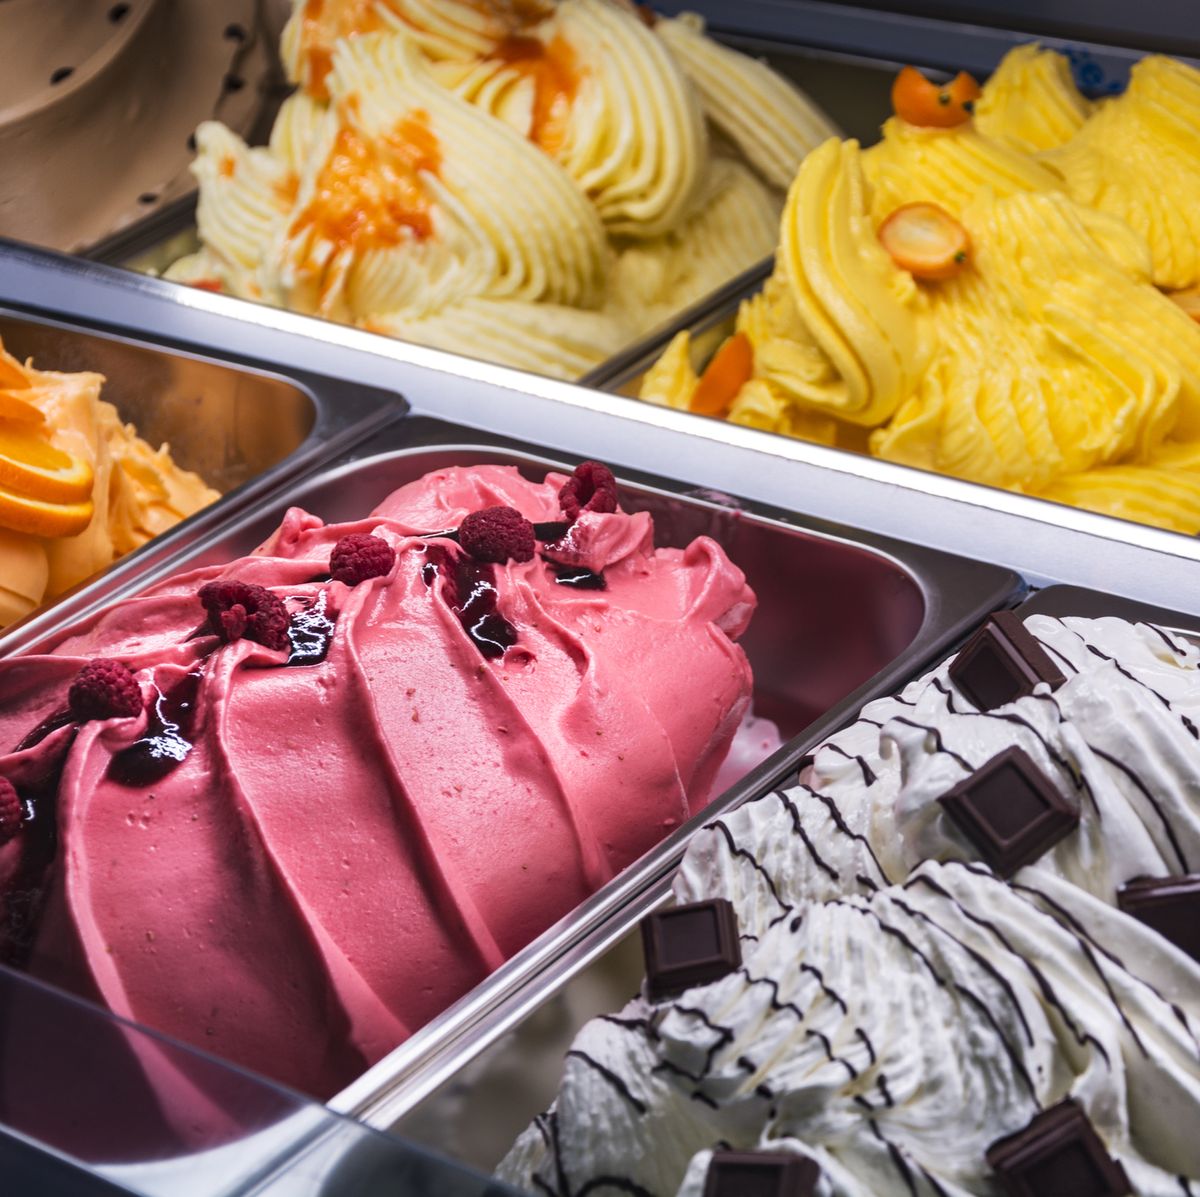 Gelato vs Ice Cream: What's the Difference?